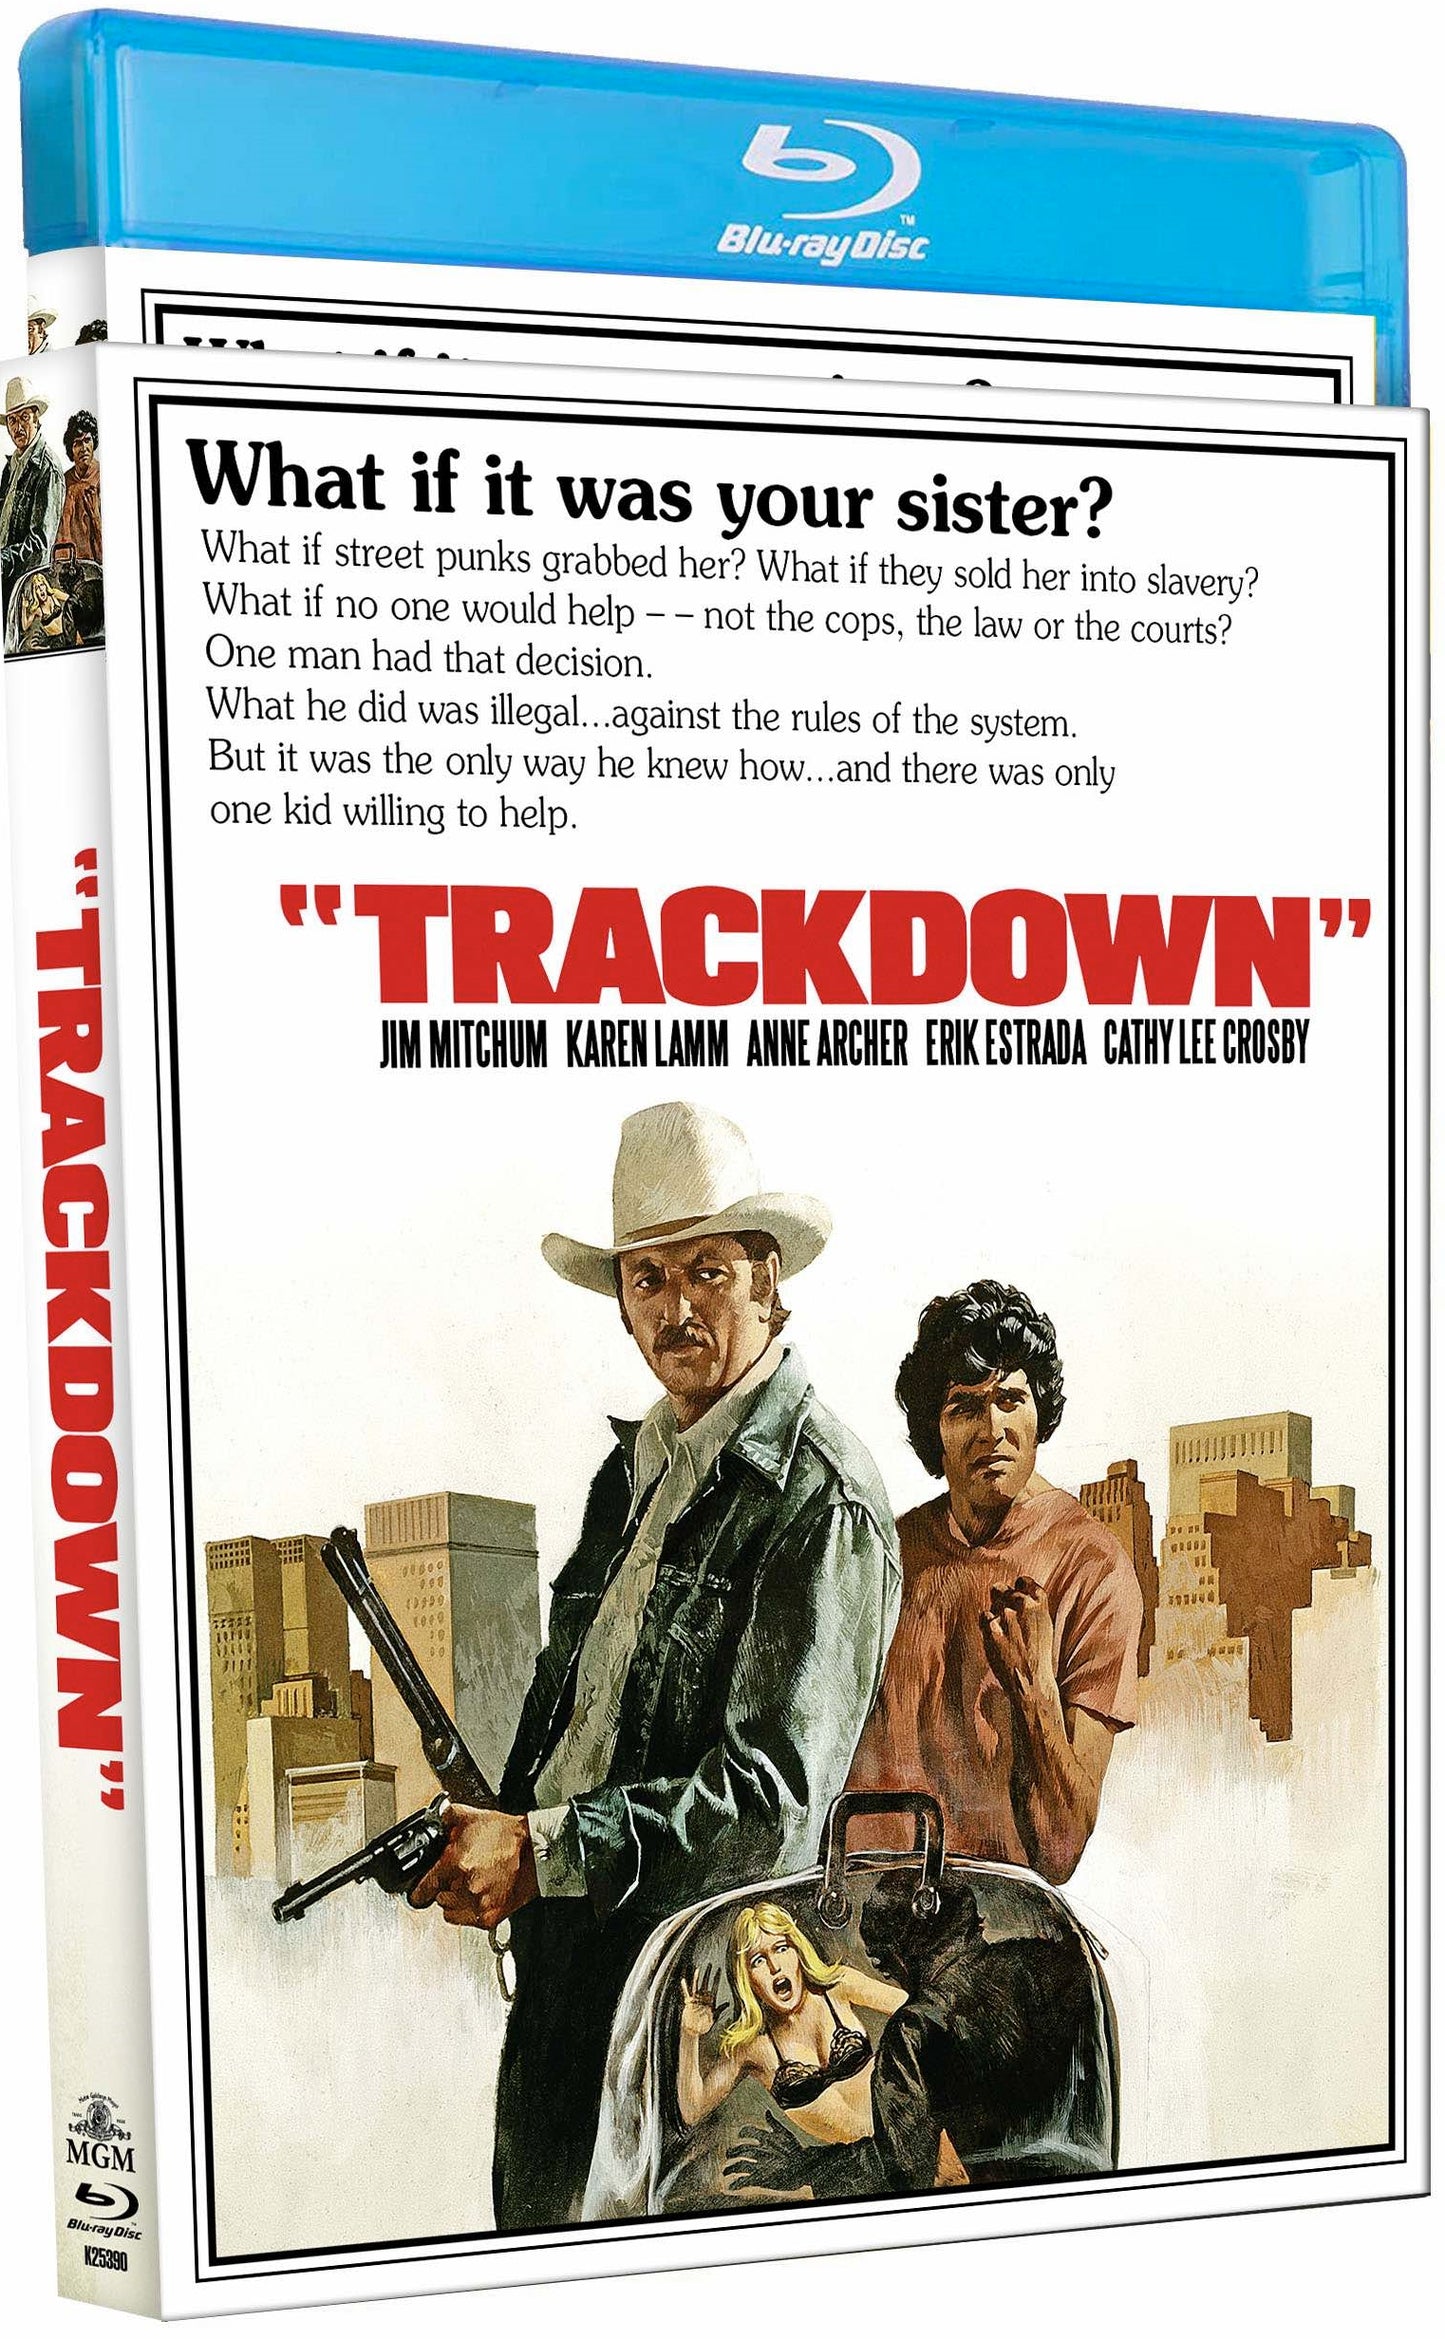 Trackdown [Blu-ray] cover art